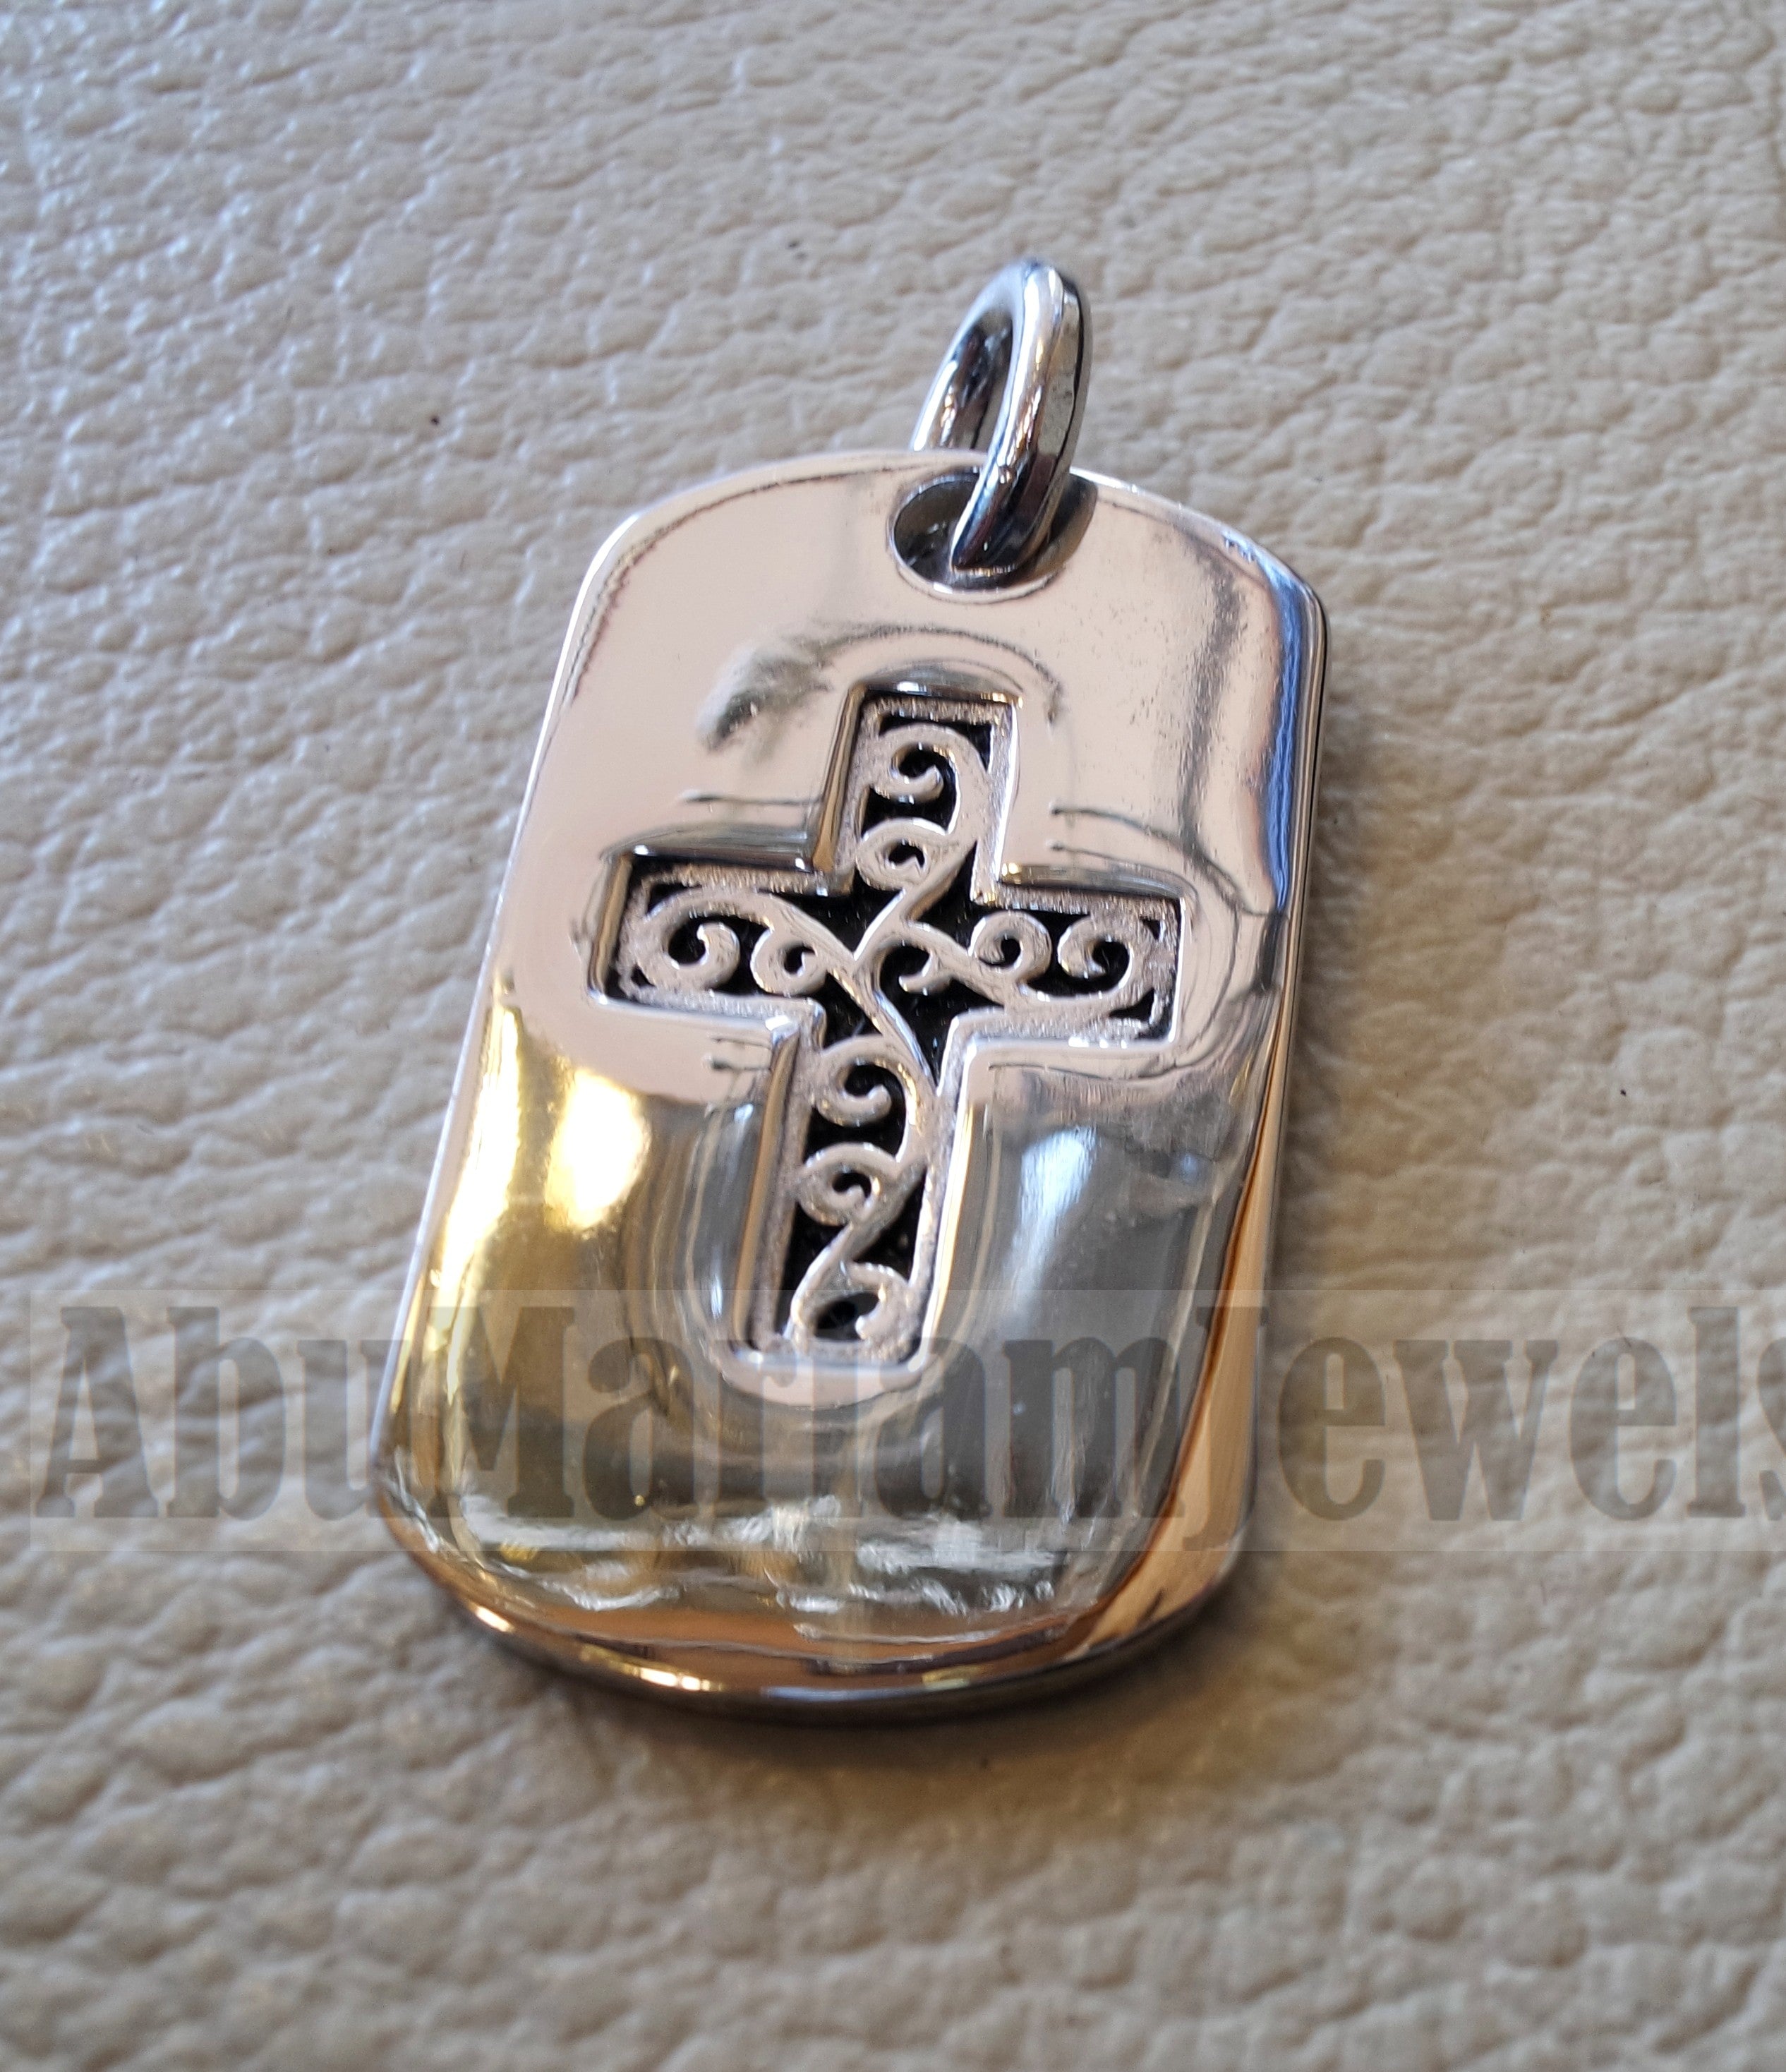 Heavy cross pendant sterling silver 925 middle eastern style religious jewelry christianity vintage handmade heavy express shipping